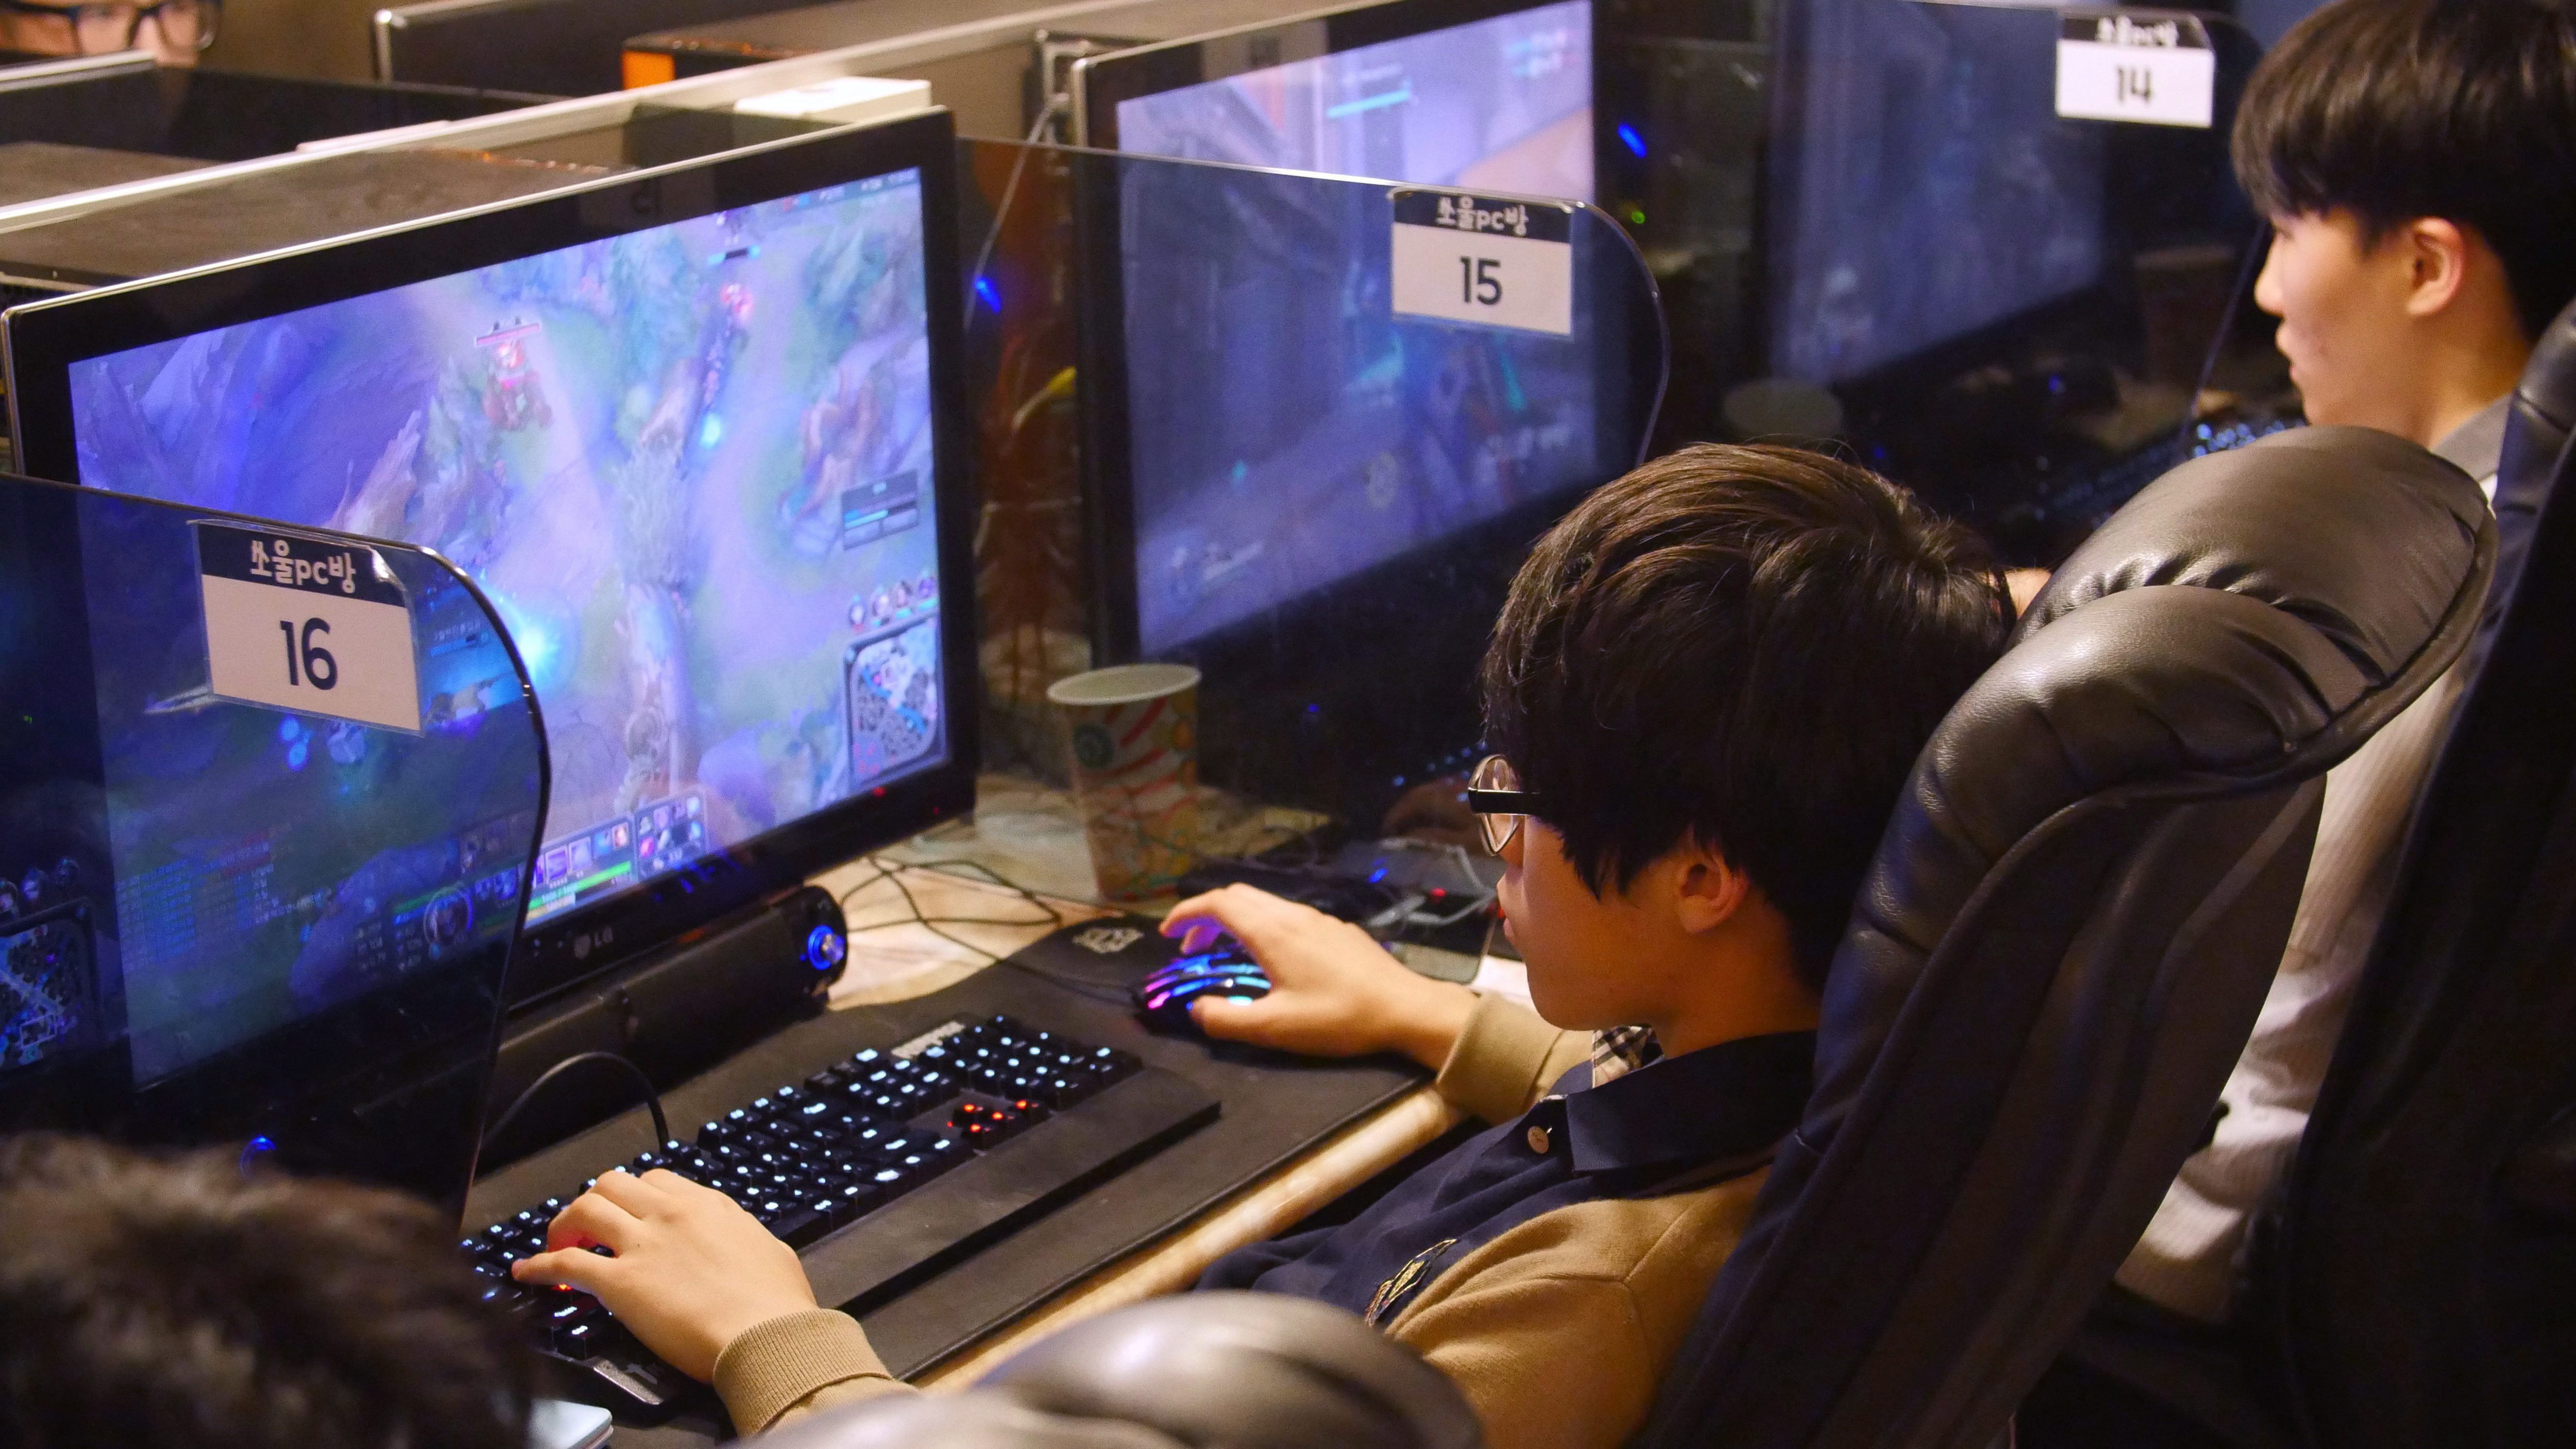 In this Aug. 30, 2016, photo, a man plays a computer game at a PC cafe in Seoul, South Korea. South Korea started the e-sports industry in the early 2000s, and it continues to be a world leader in competitive gaming. There are not only professional video game players, but also broadcasting channels and professional leagues for different kinds of games. South Koreans can easily watch professional gamers playing on both television and the internet. (AP Photo/Jungho Choi)